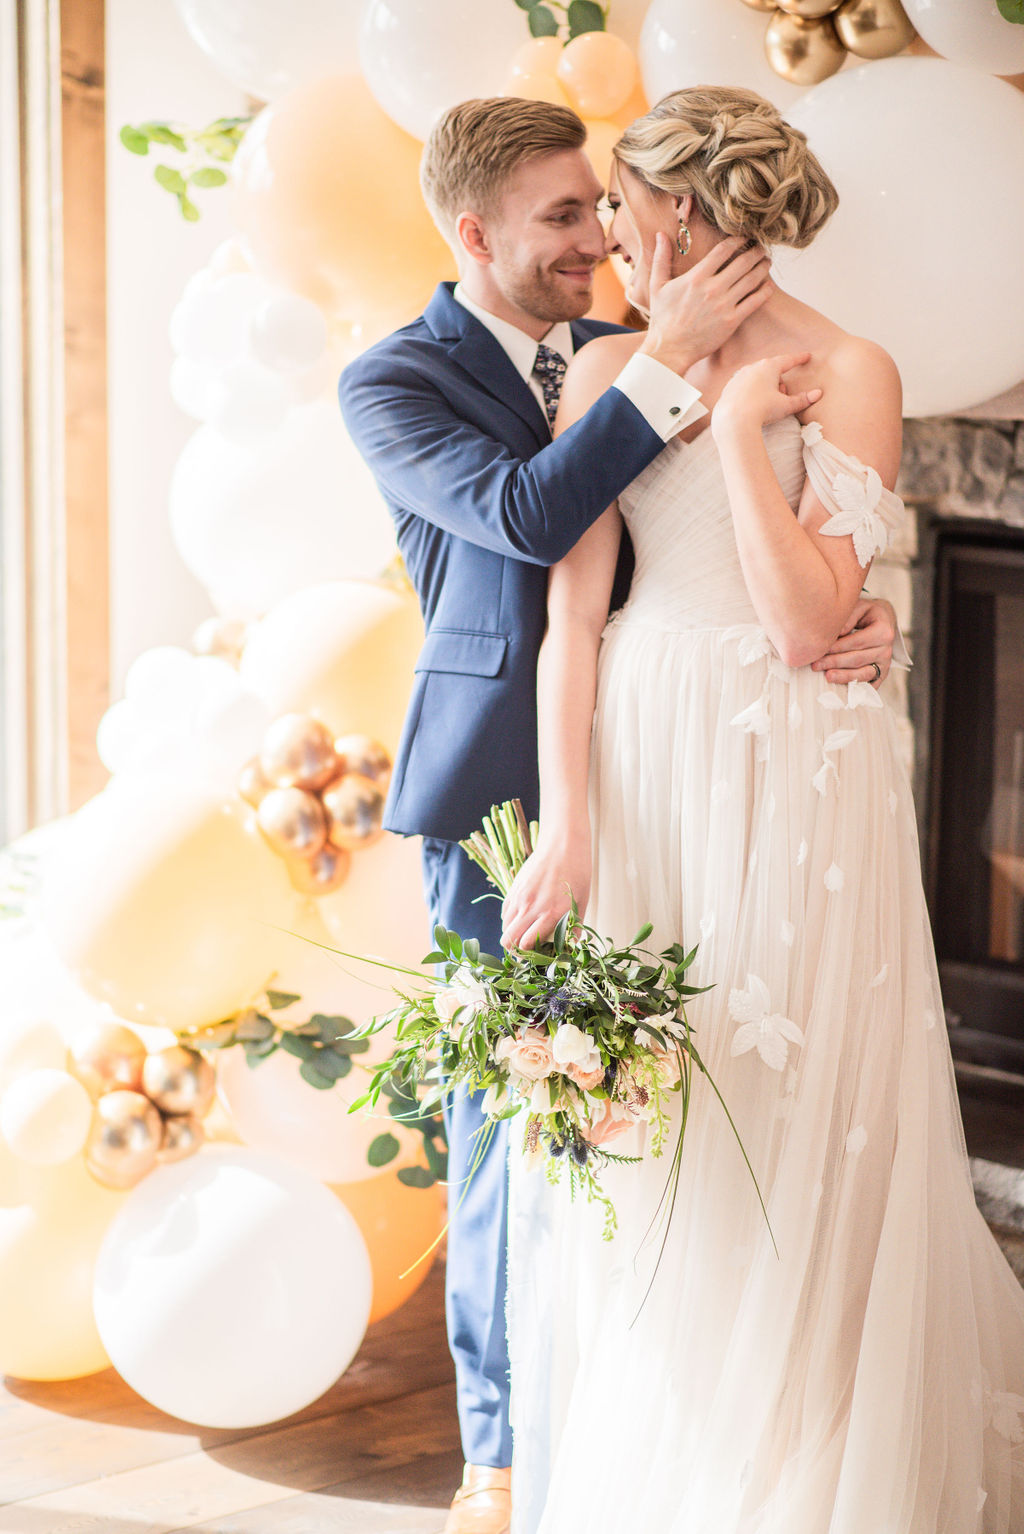 Groom in a blue suit, kissing a bride in a cream wedding dress, holding a bouquet of flowers